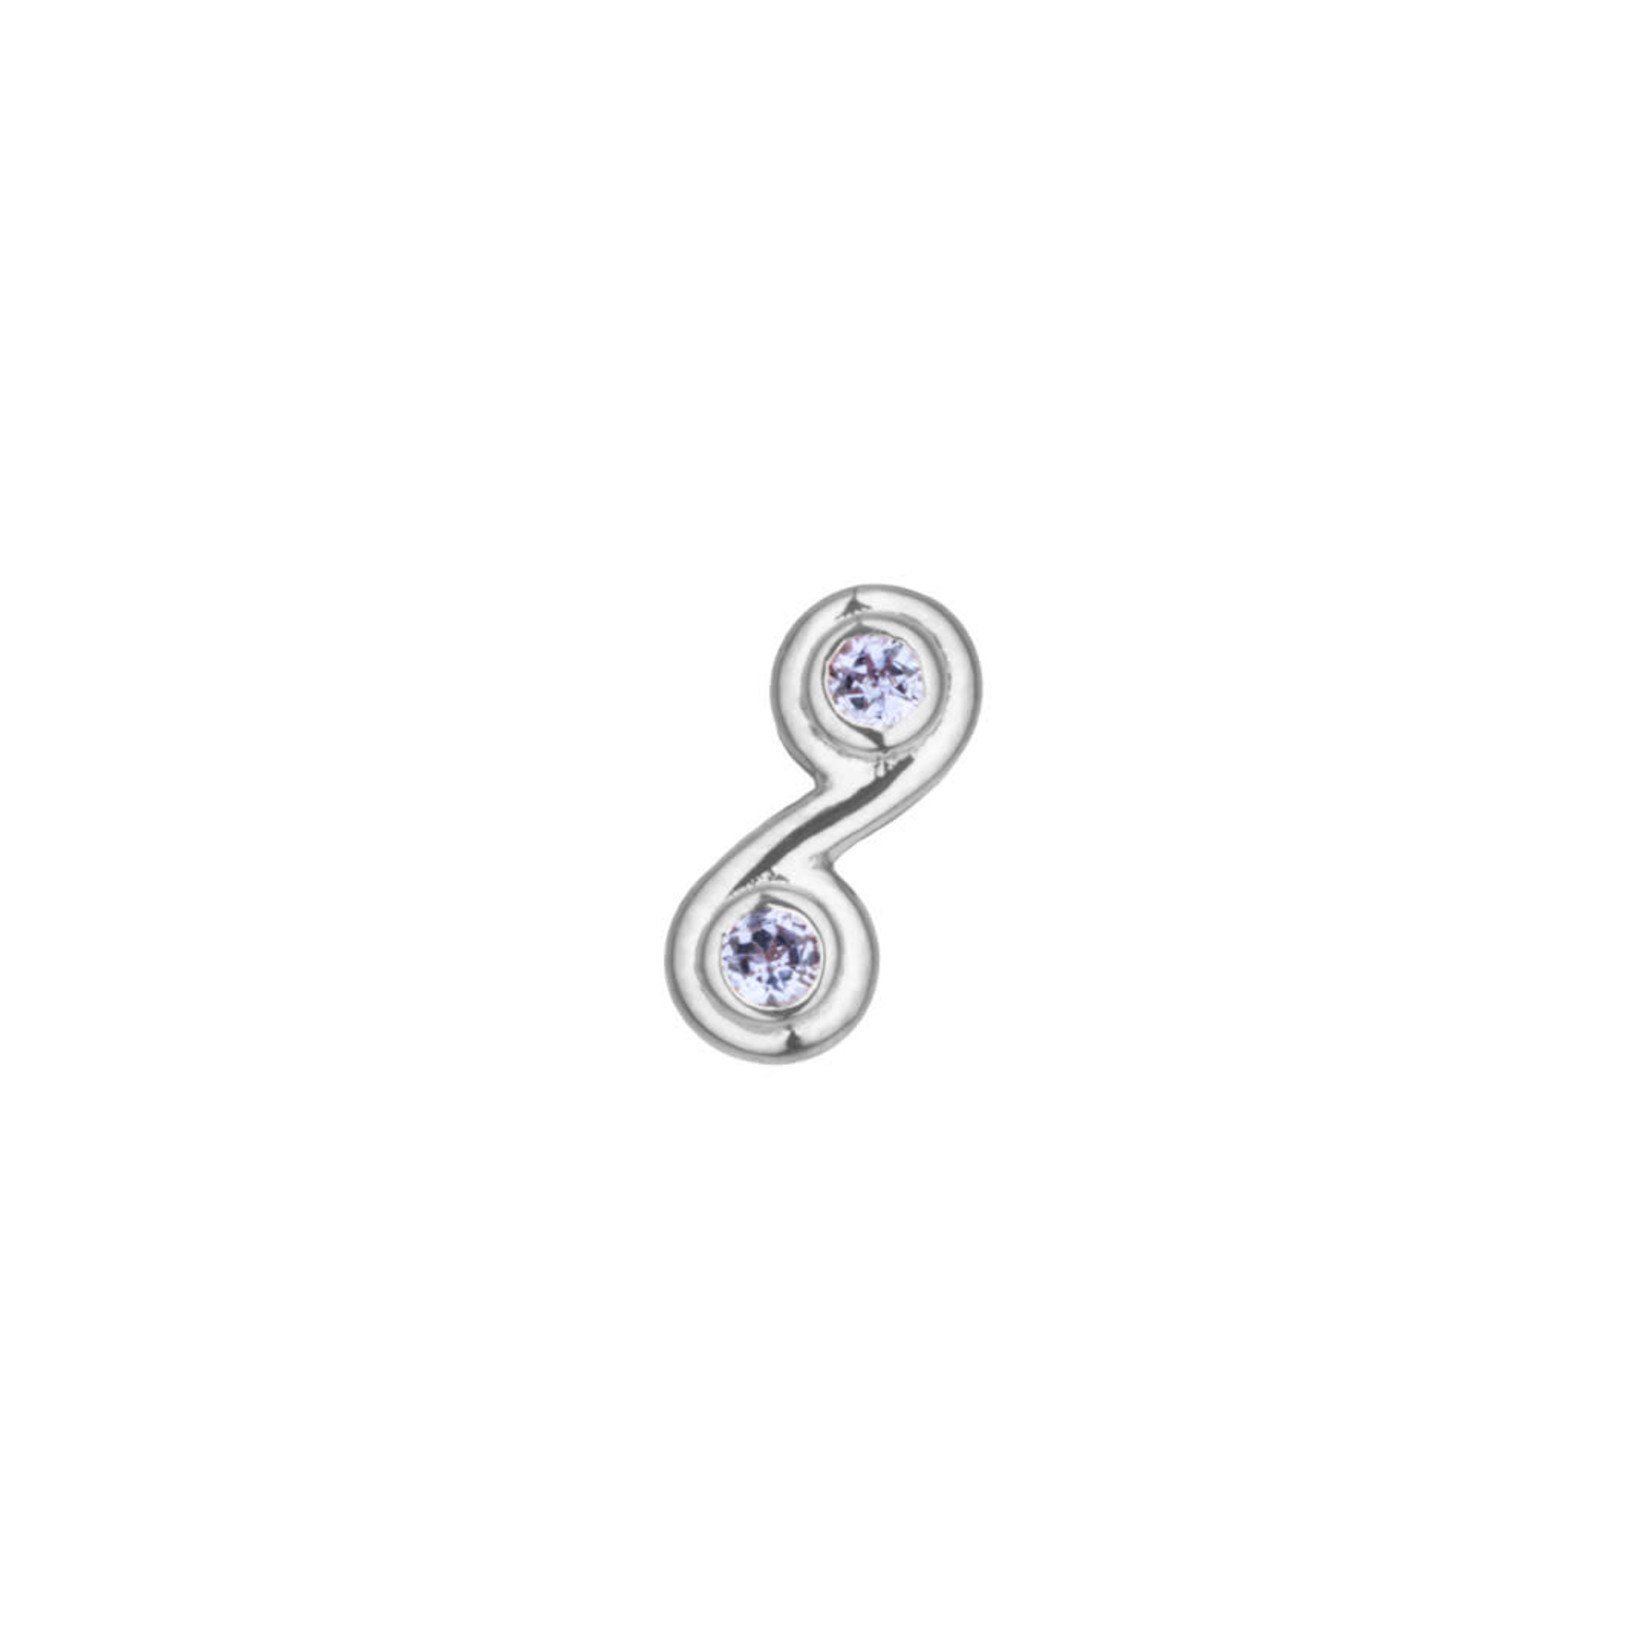 BVLA BVLA "Double gem swirl" threaded end with 1.5 AA Tanzanite